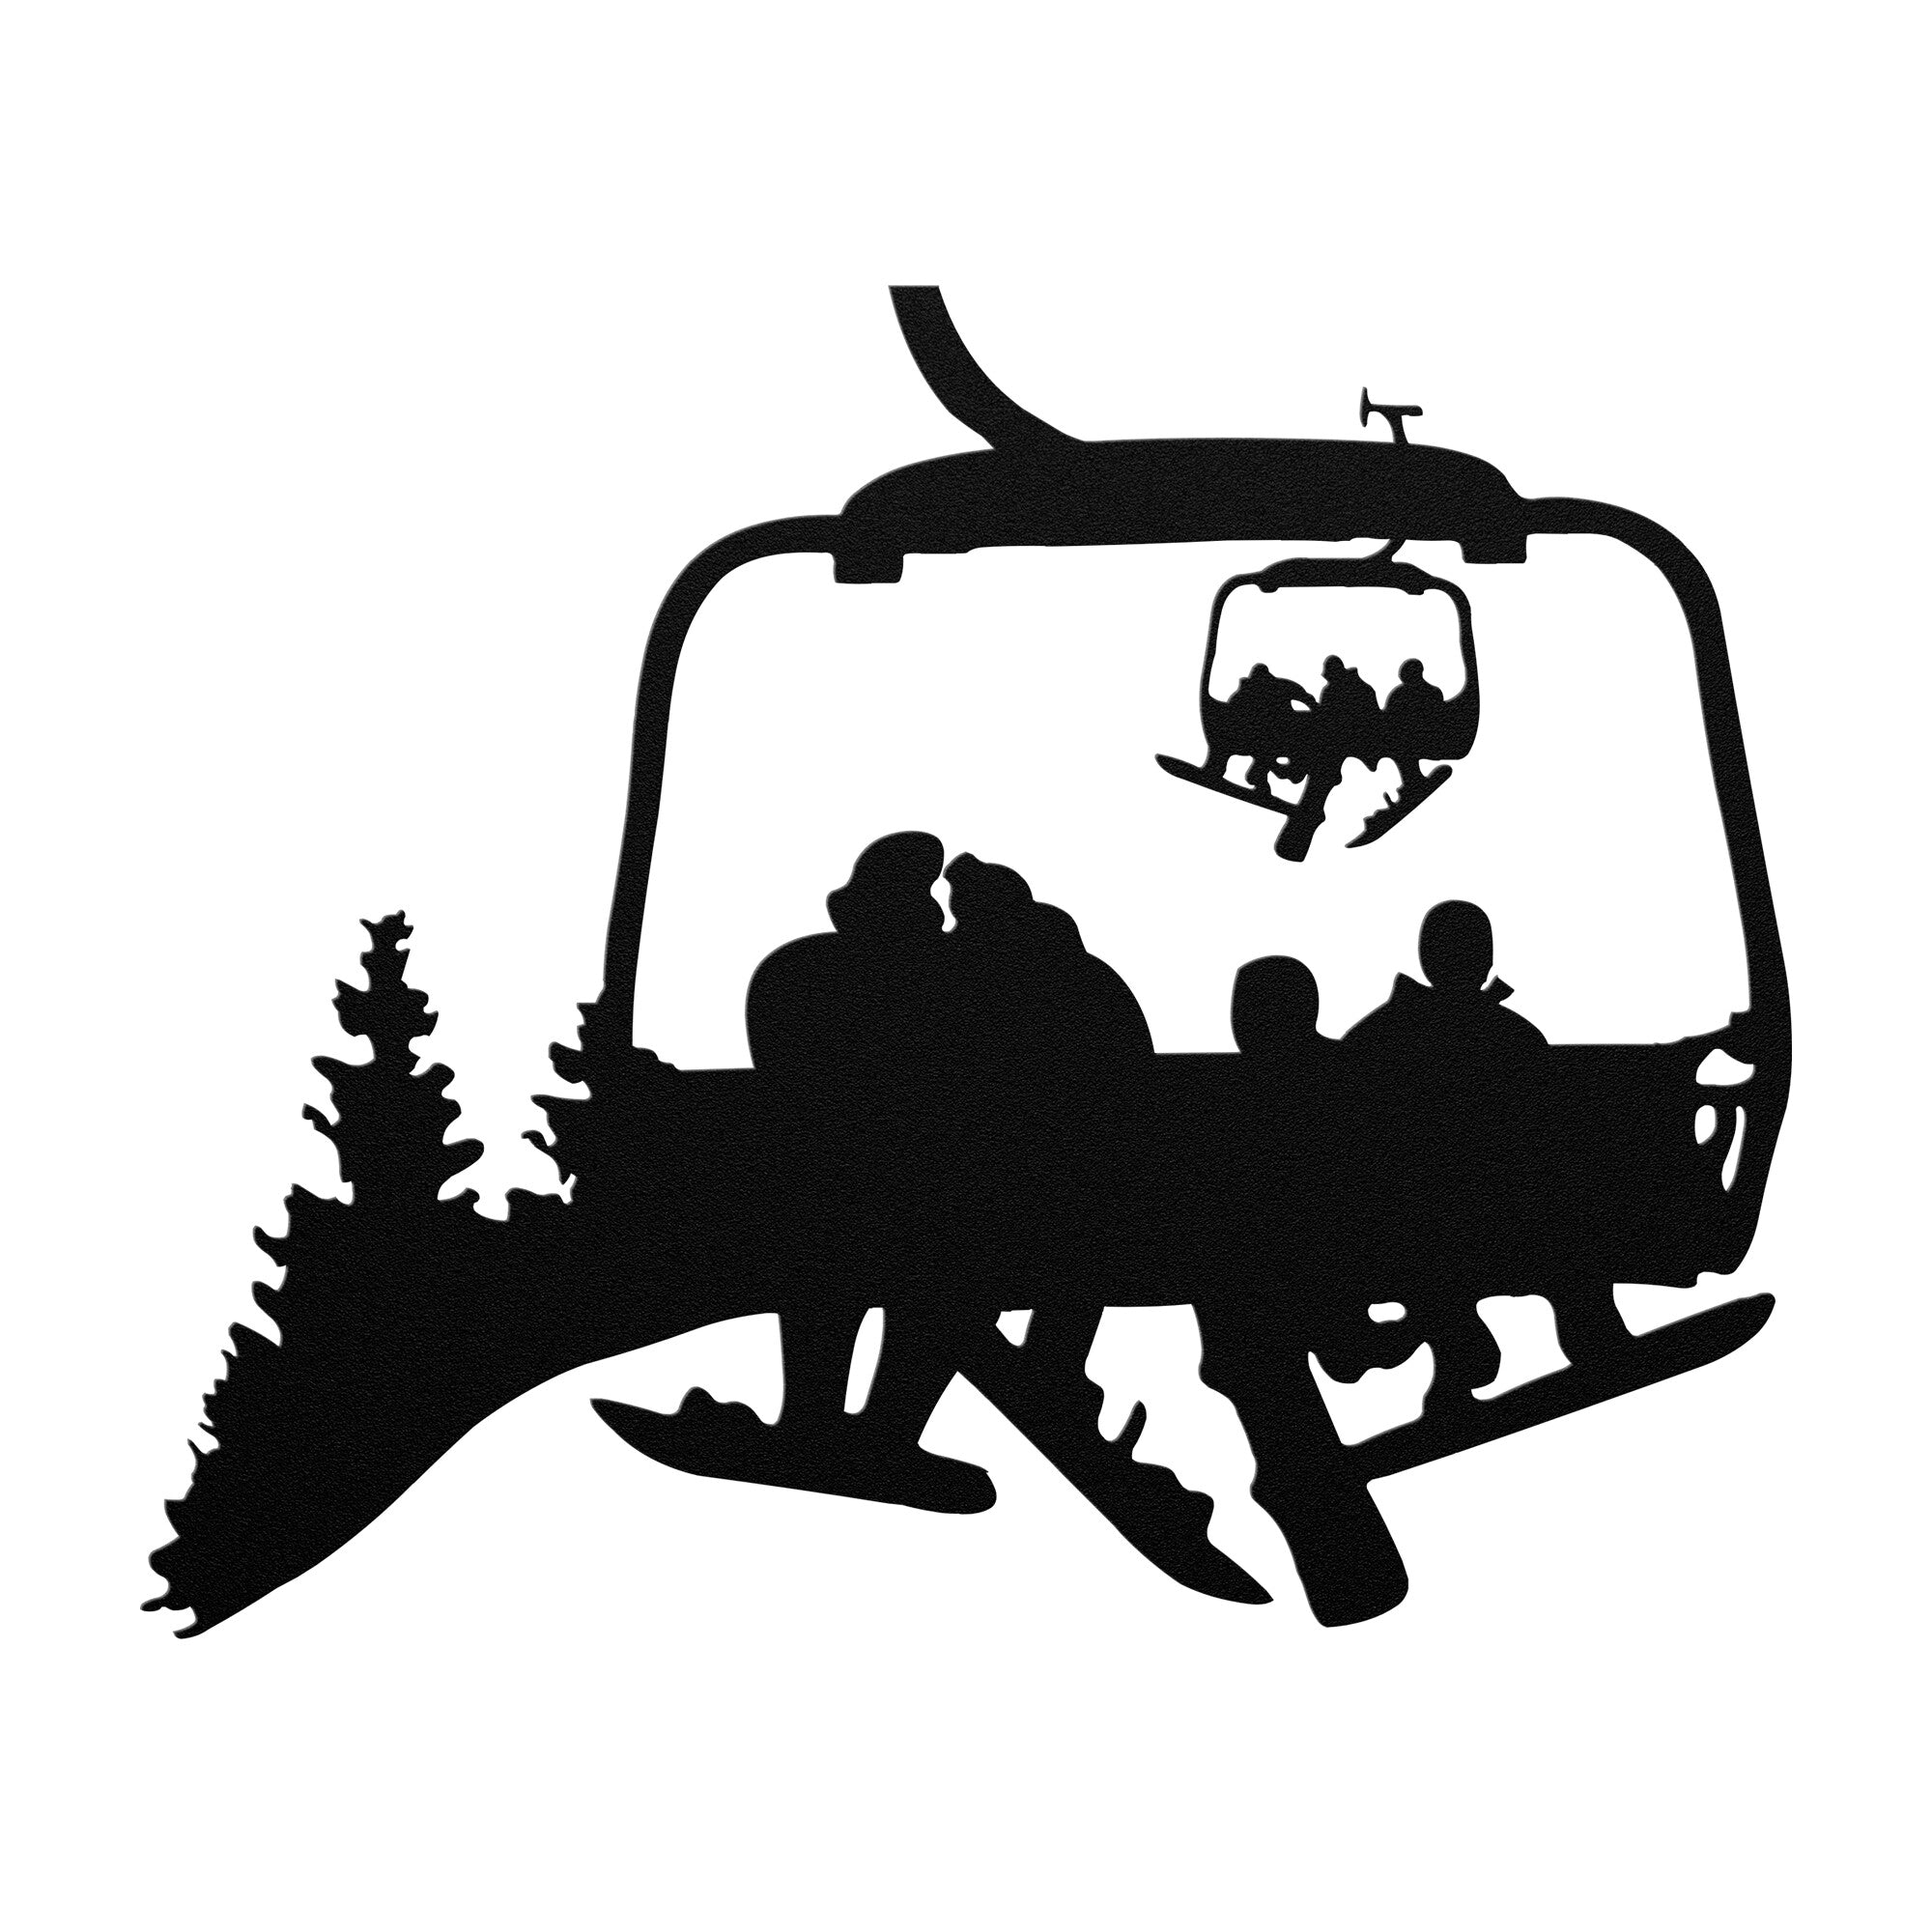 PERSONALIZED CHAIRLIFT SNOWBOARDING FAMILY METAL WALL ART,  2 SNOWBOARDING PARENTS, 2 SNOWBOARDING CHILDREN  (🇺🇸 MADE IN THE USA)